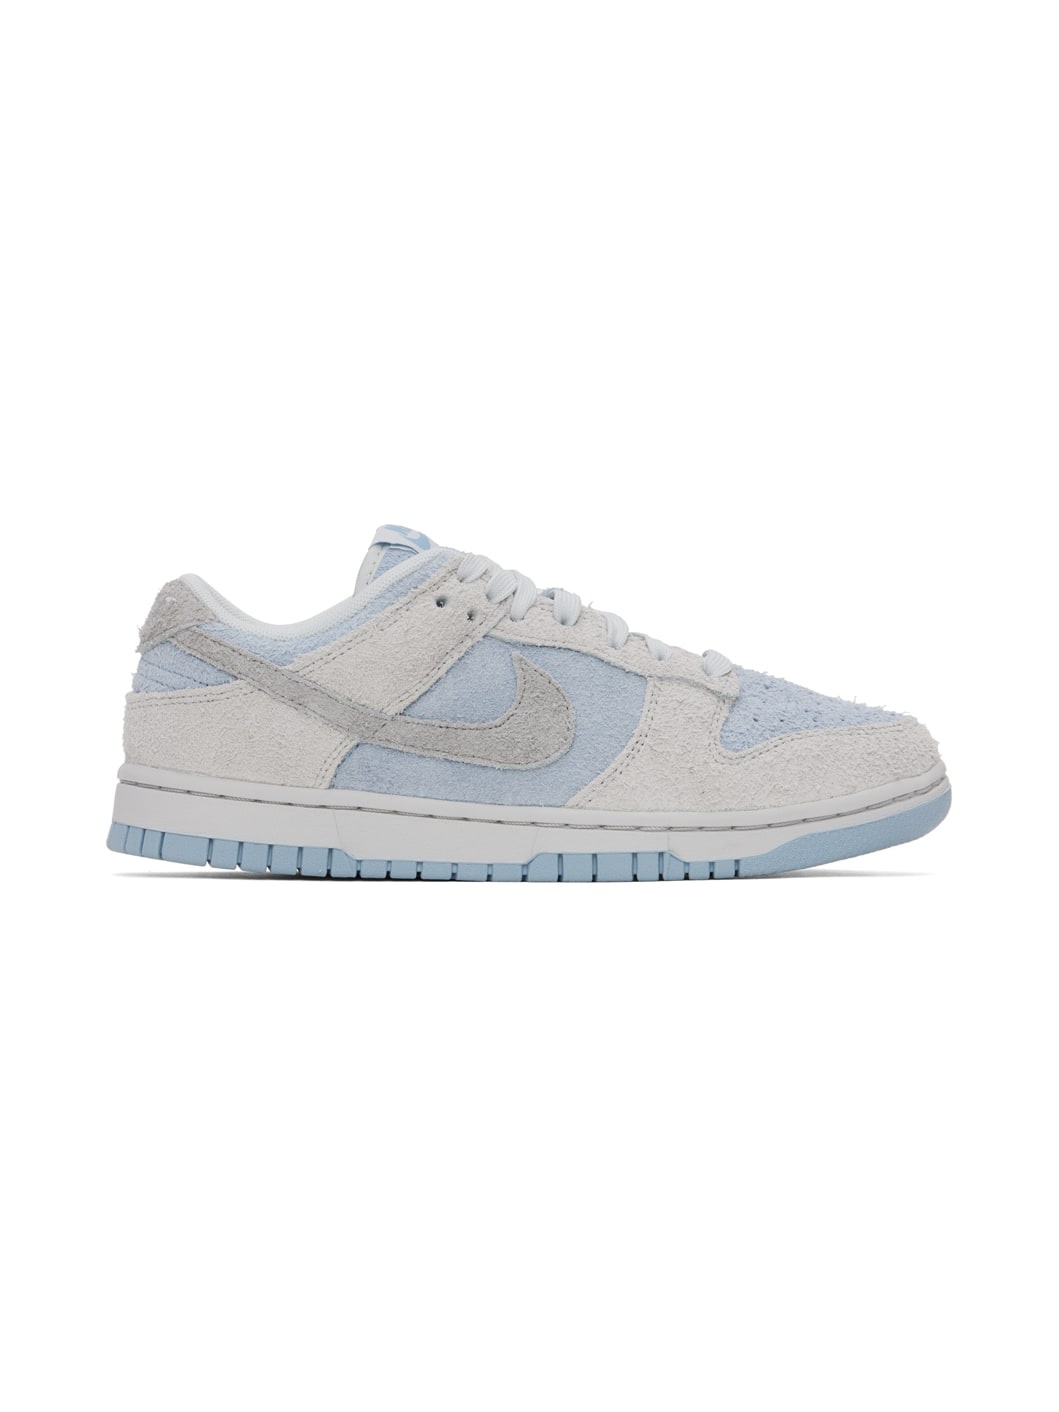 Blue & Gray Dunk Low Sneakers - 1